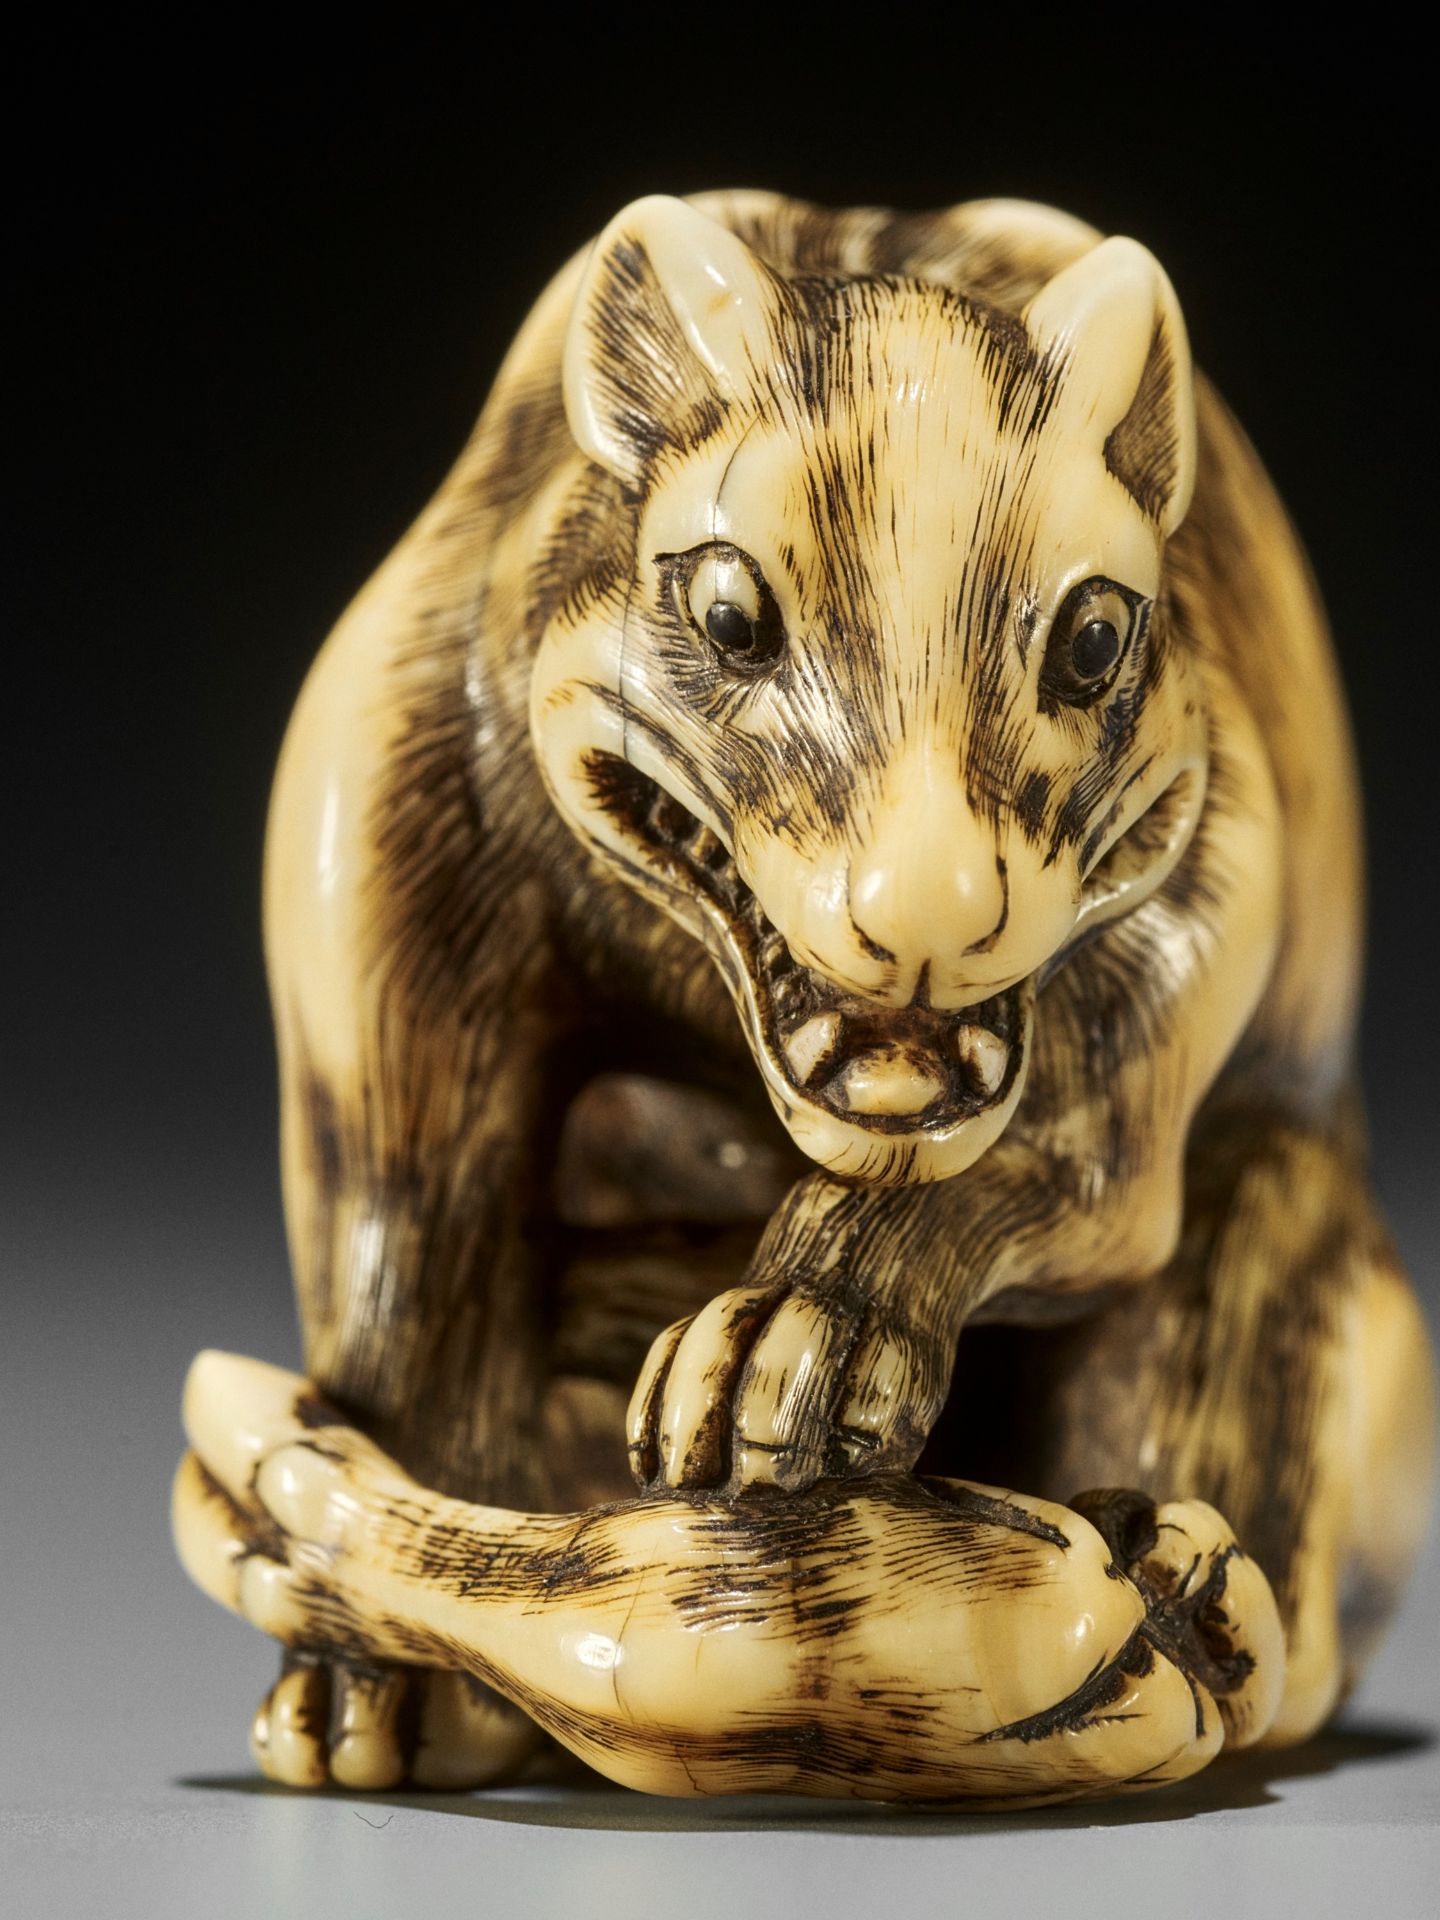 TOMOTADA: A FINE IVORY NETSUKE OF A WOLF WITH HAUNCH OF VENISON - Image 6 of 18